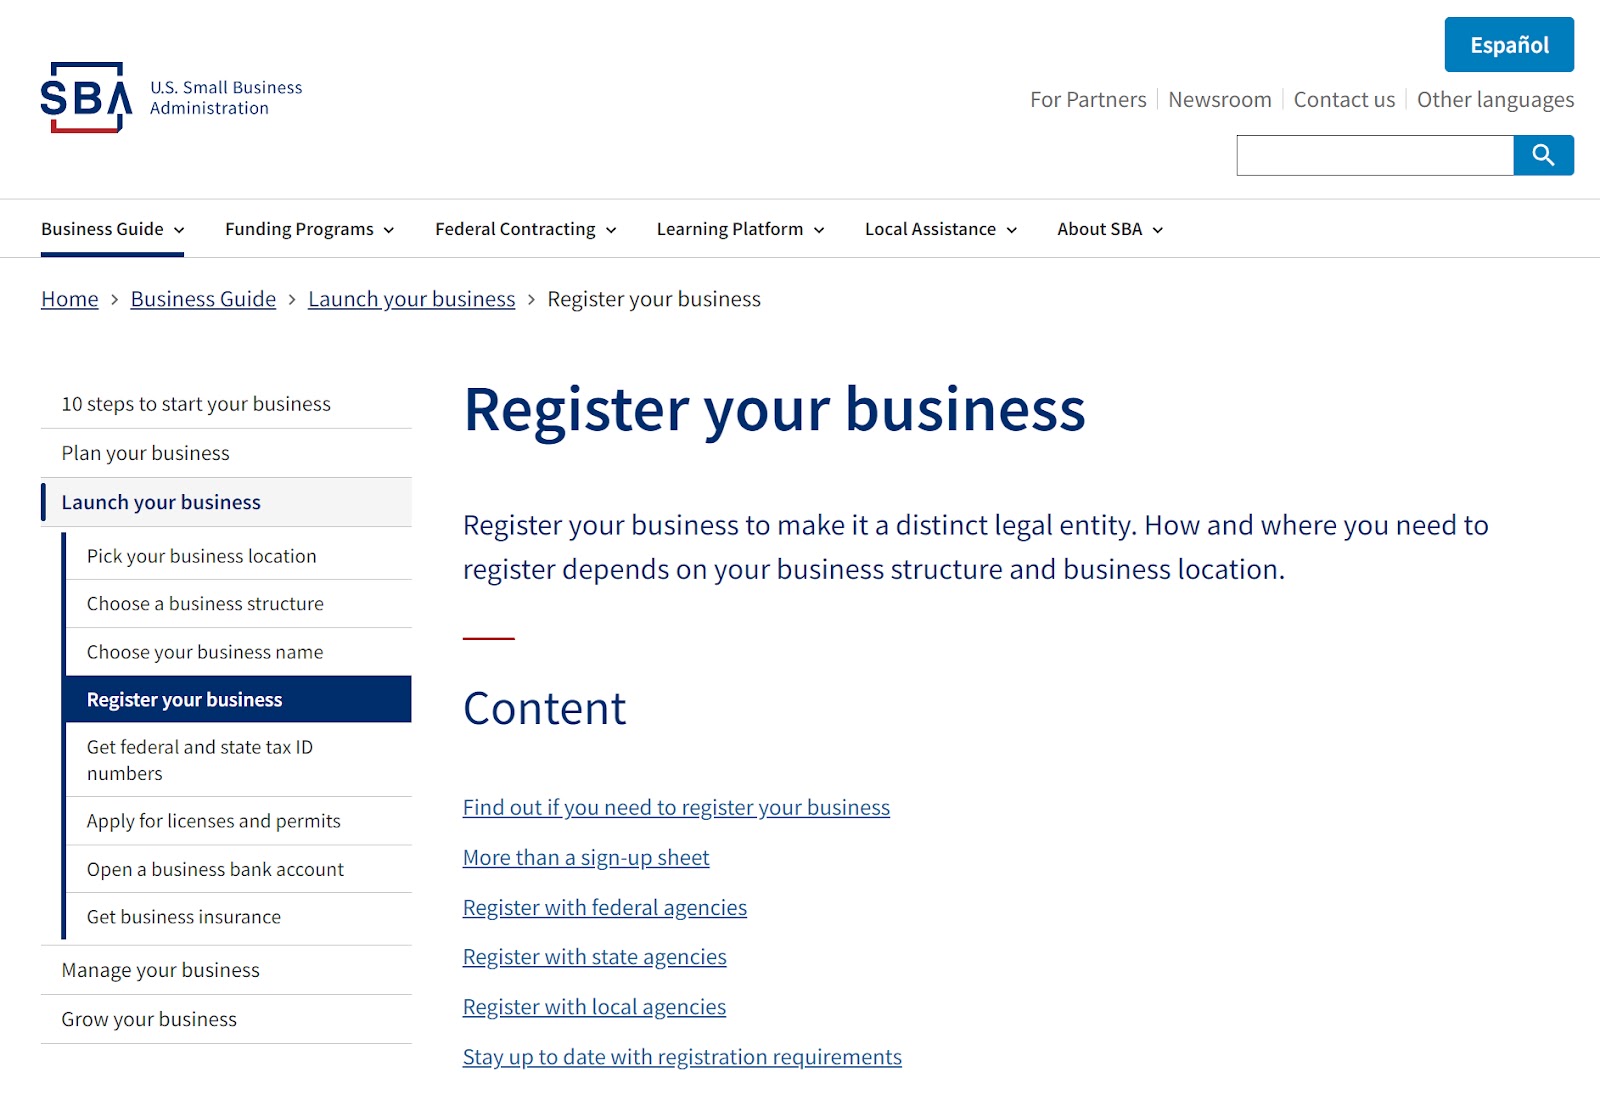 "Register your business" page on U.S. Small Business Administration website